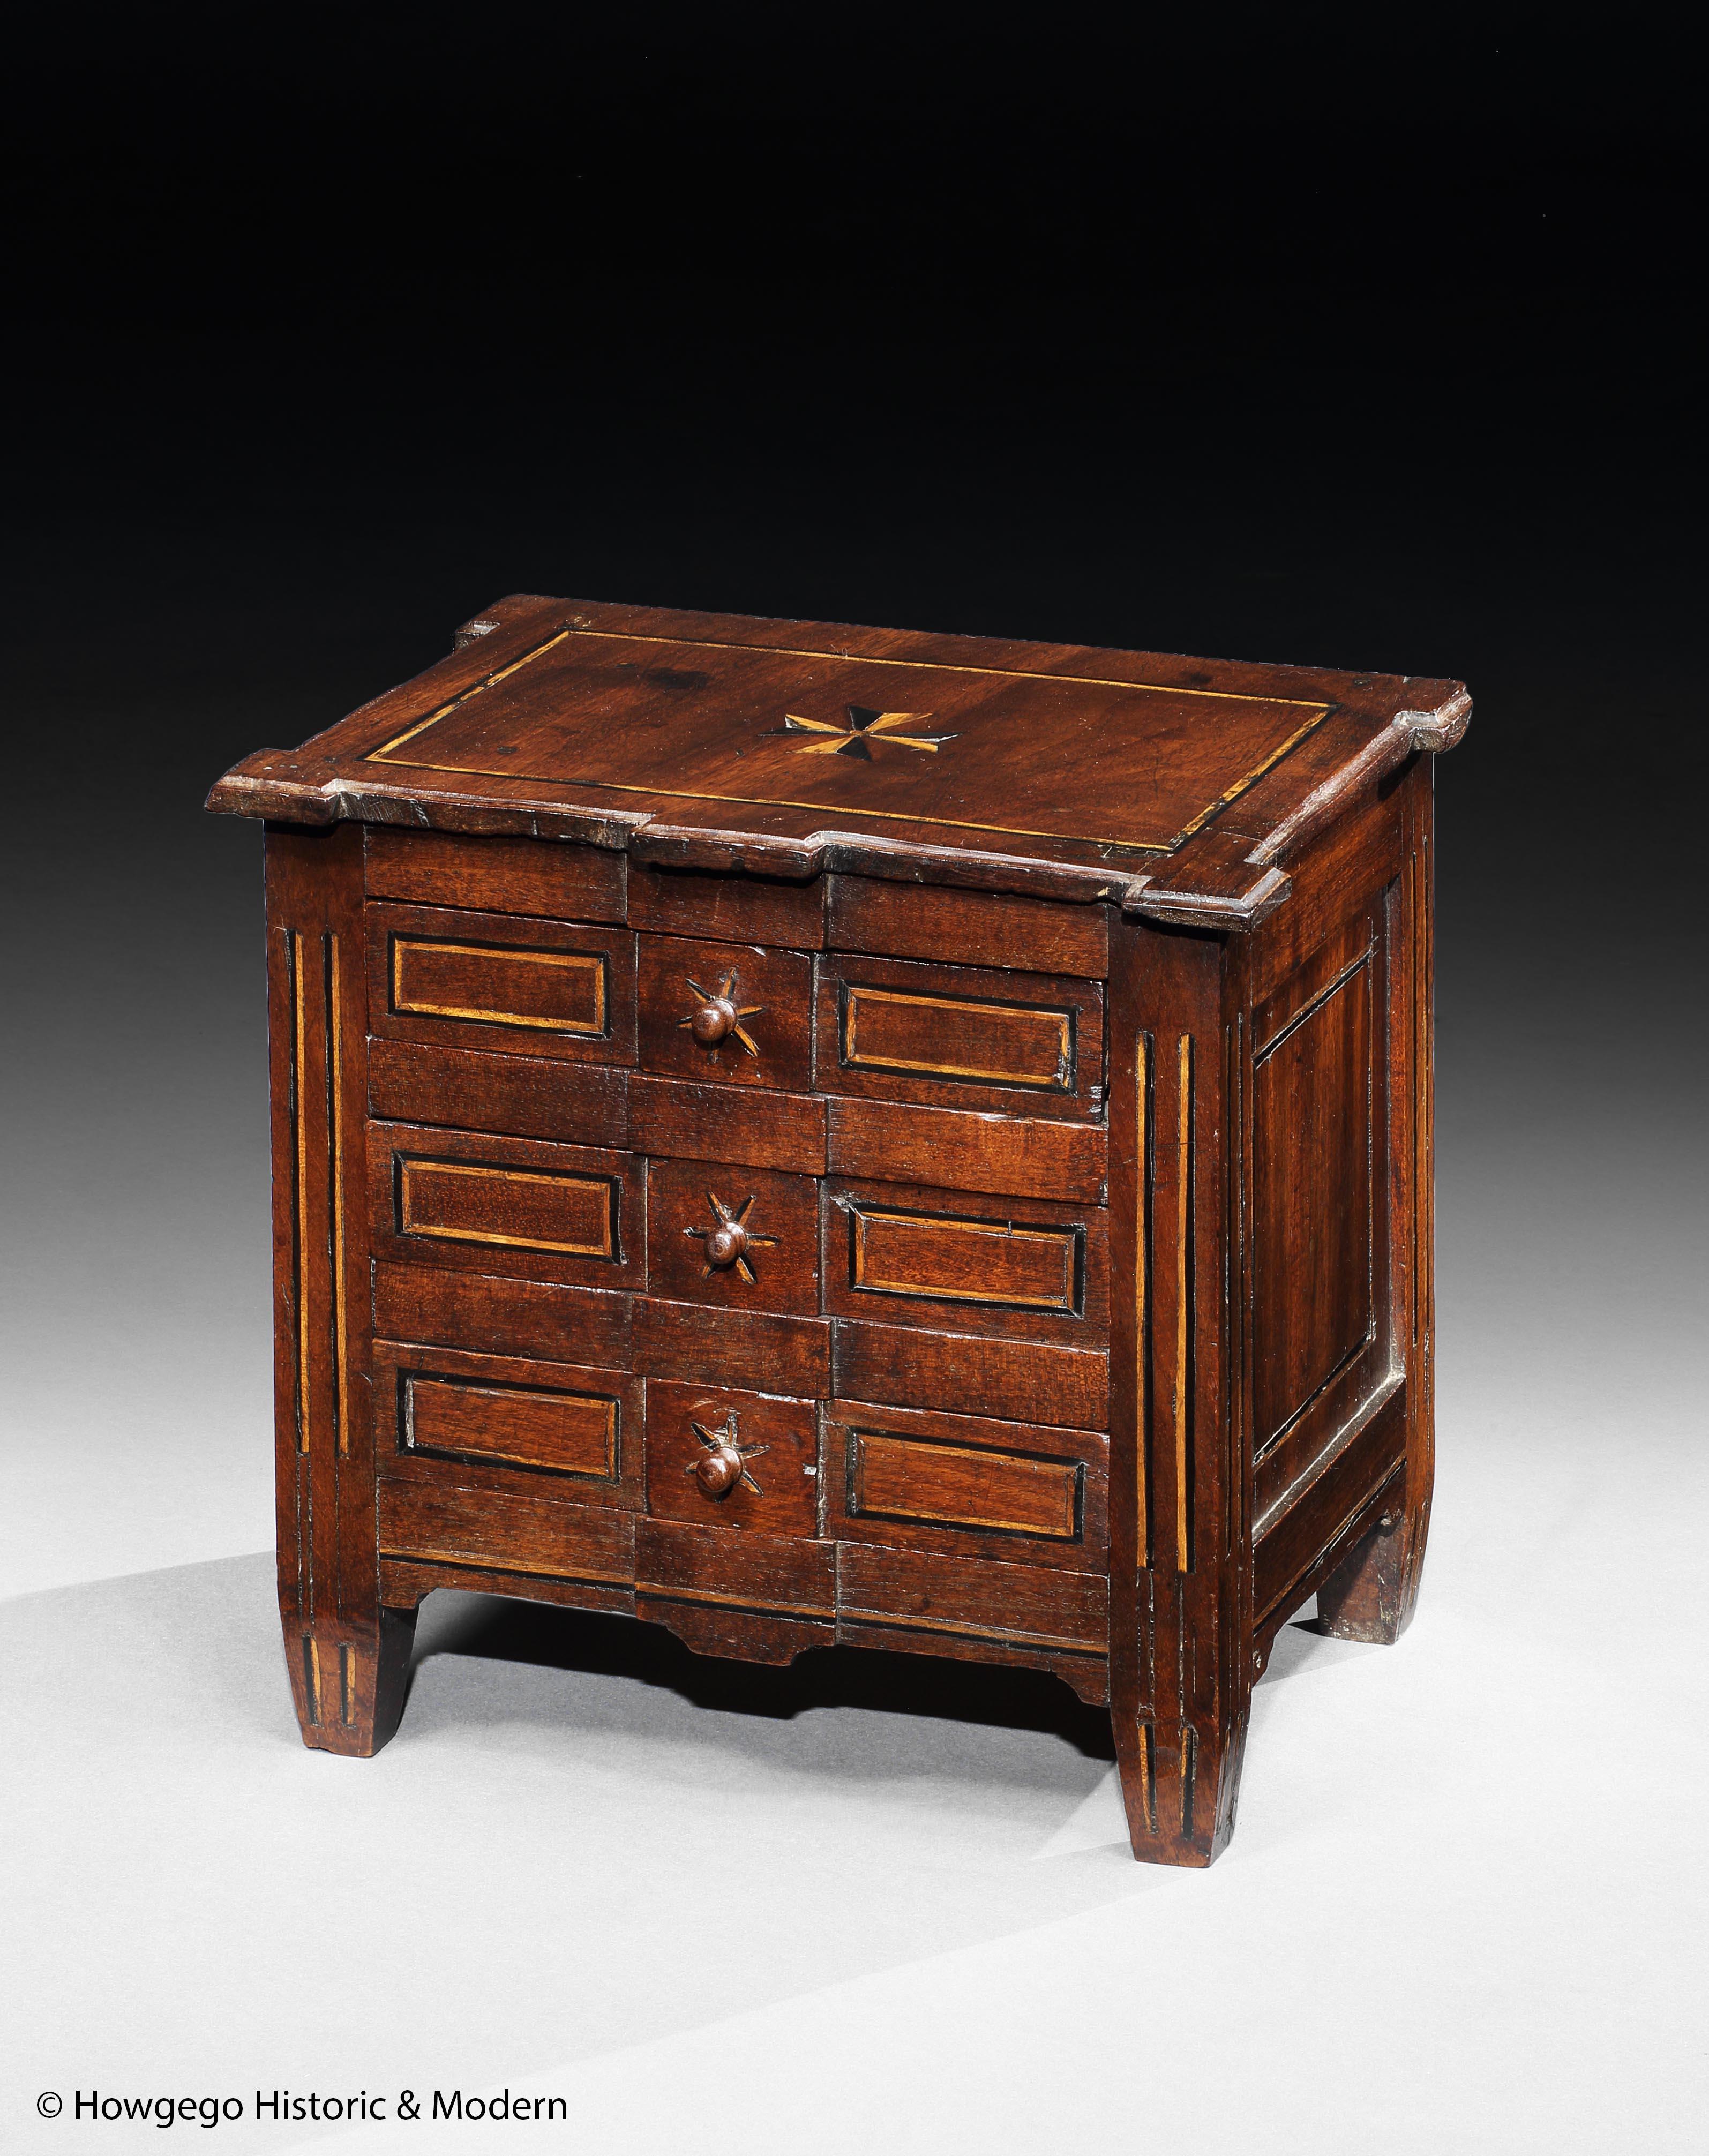 An exceptionally rare, museum quality Maltese, Neoclassical walnut chest of drawers with ebonised & fruitwood inlaid maltese cross on the top and drawer fronts

Maltese furniture of this period is exceptional reflecting the status and affluence of